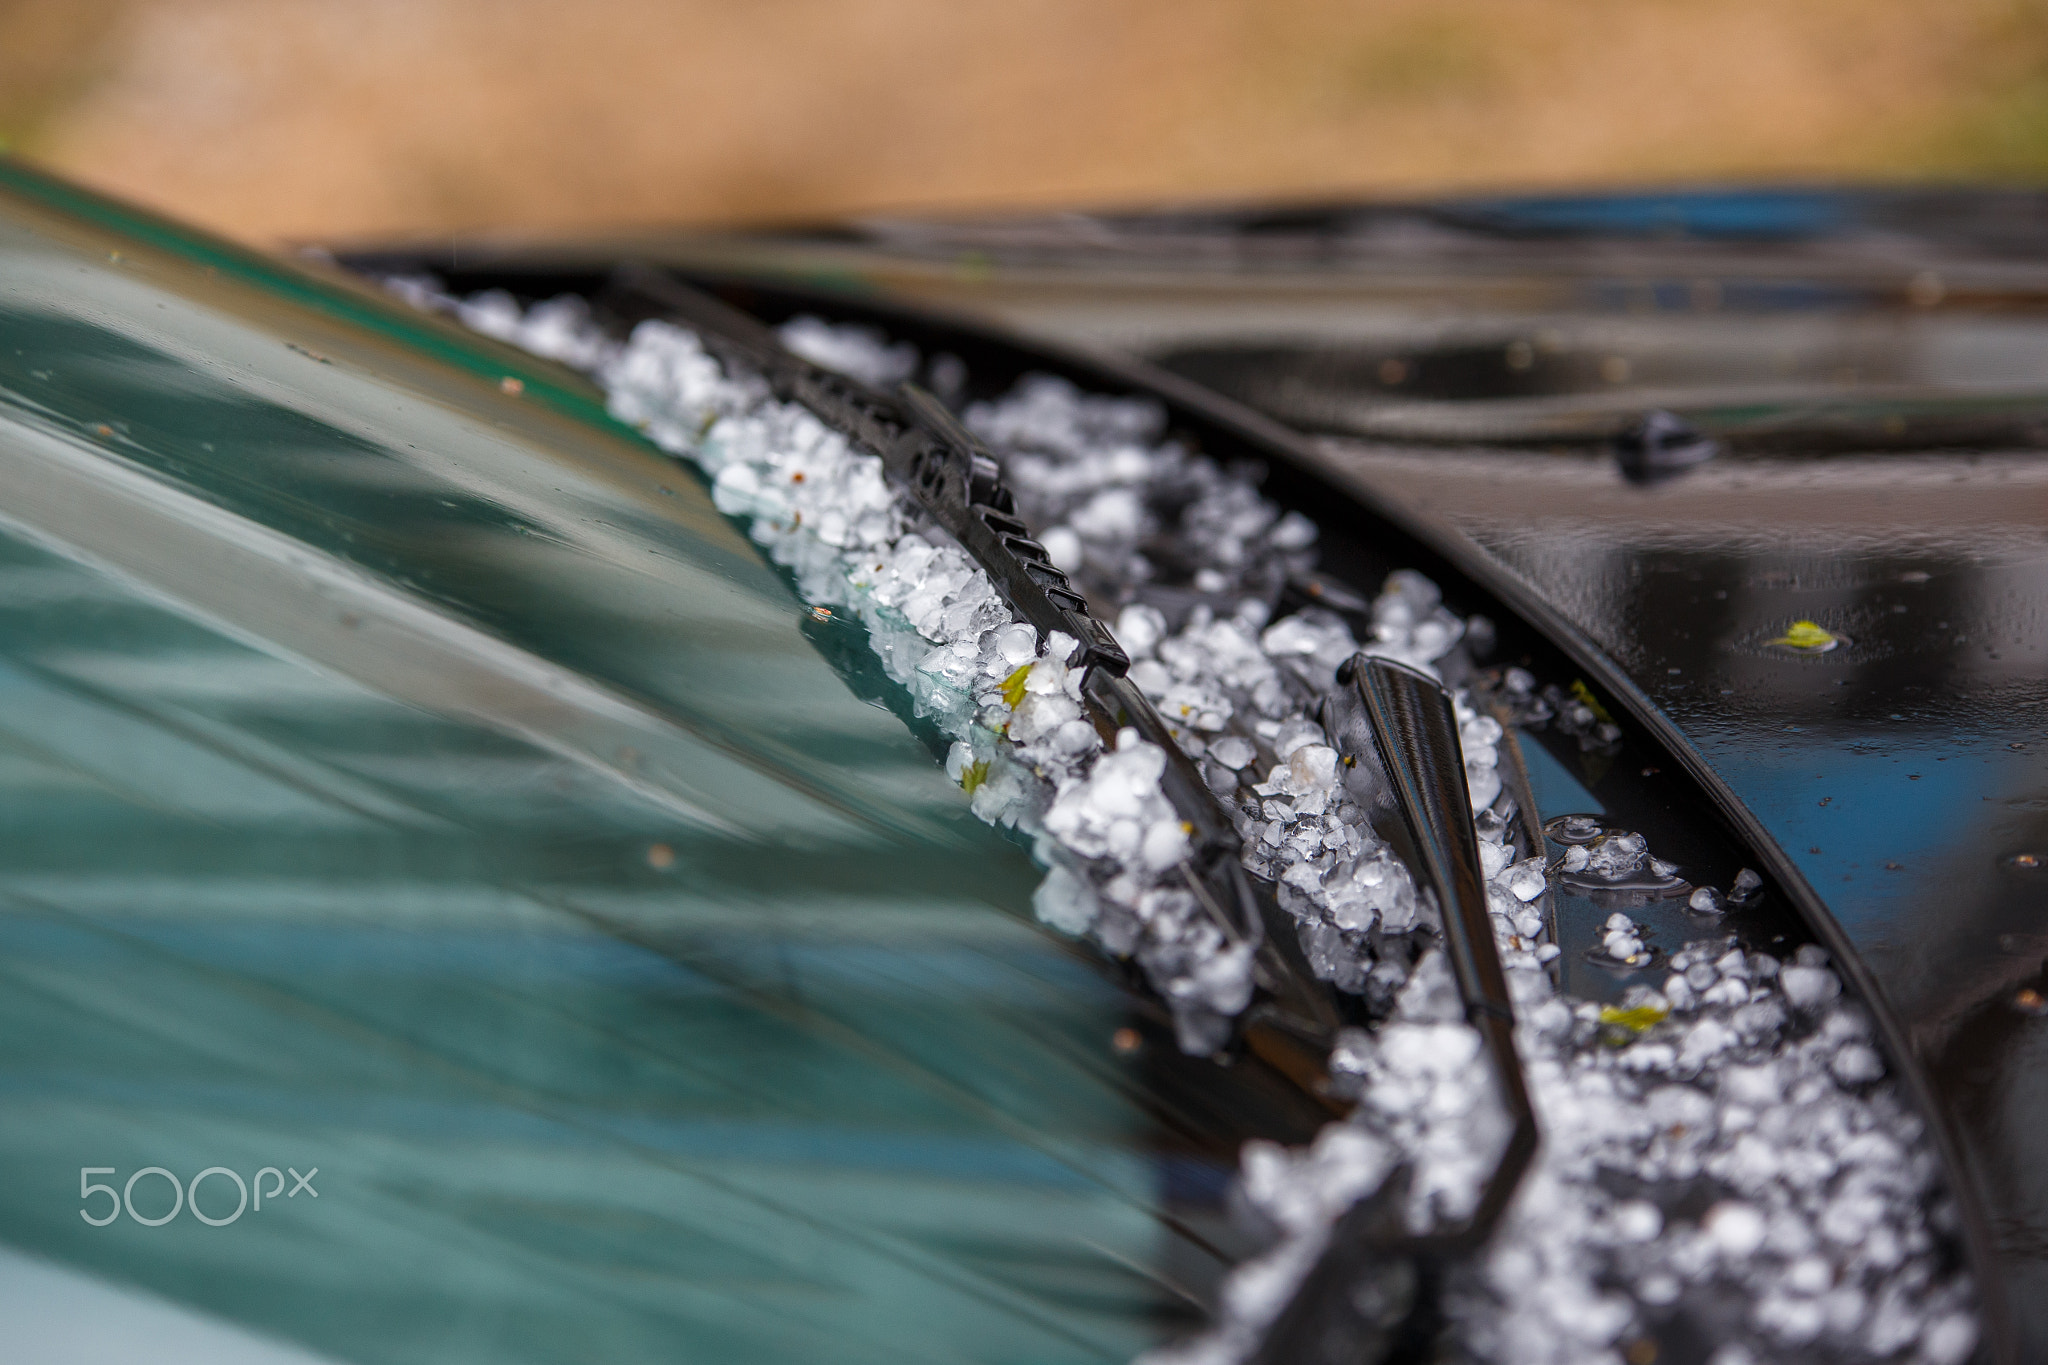 small hail ice balls on black car hood after heavy summer storm